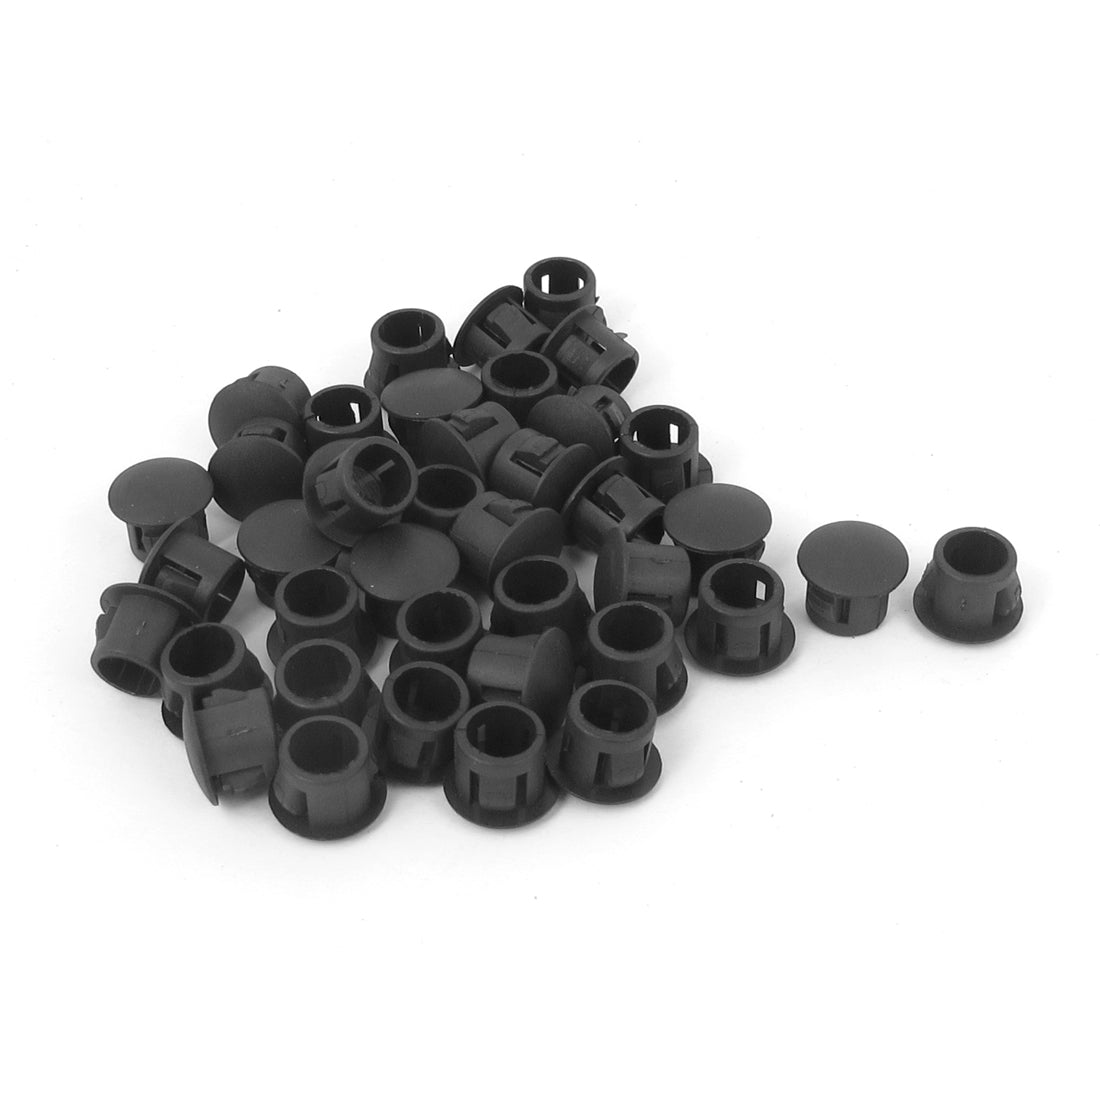 uxcell Uxcell 40pcs SKT-8 8mm Panel Dia Black Plastic Snap in Type Lock Locking Hole Cover